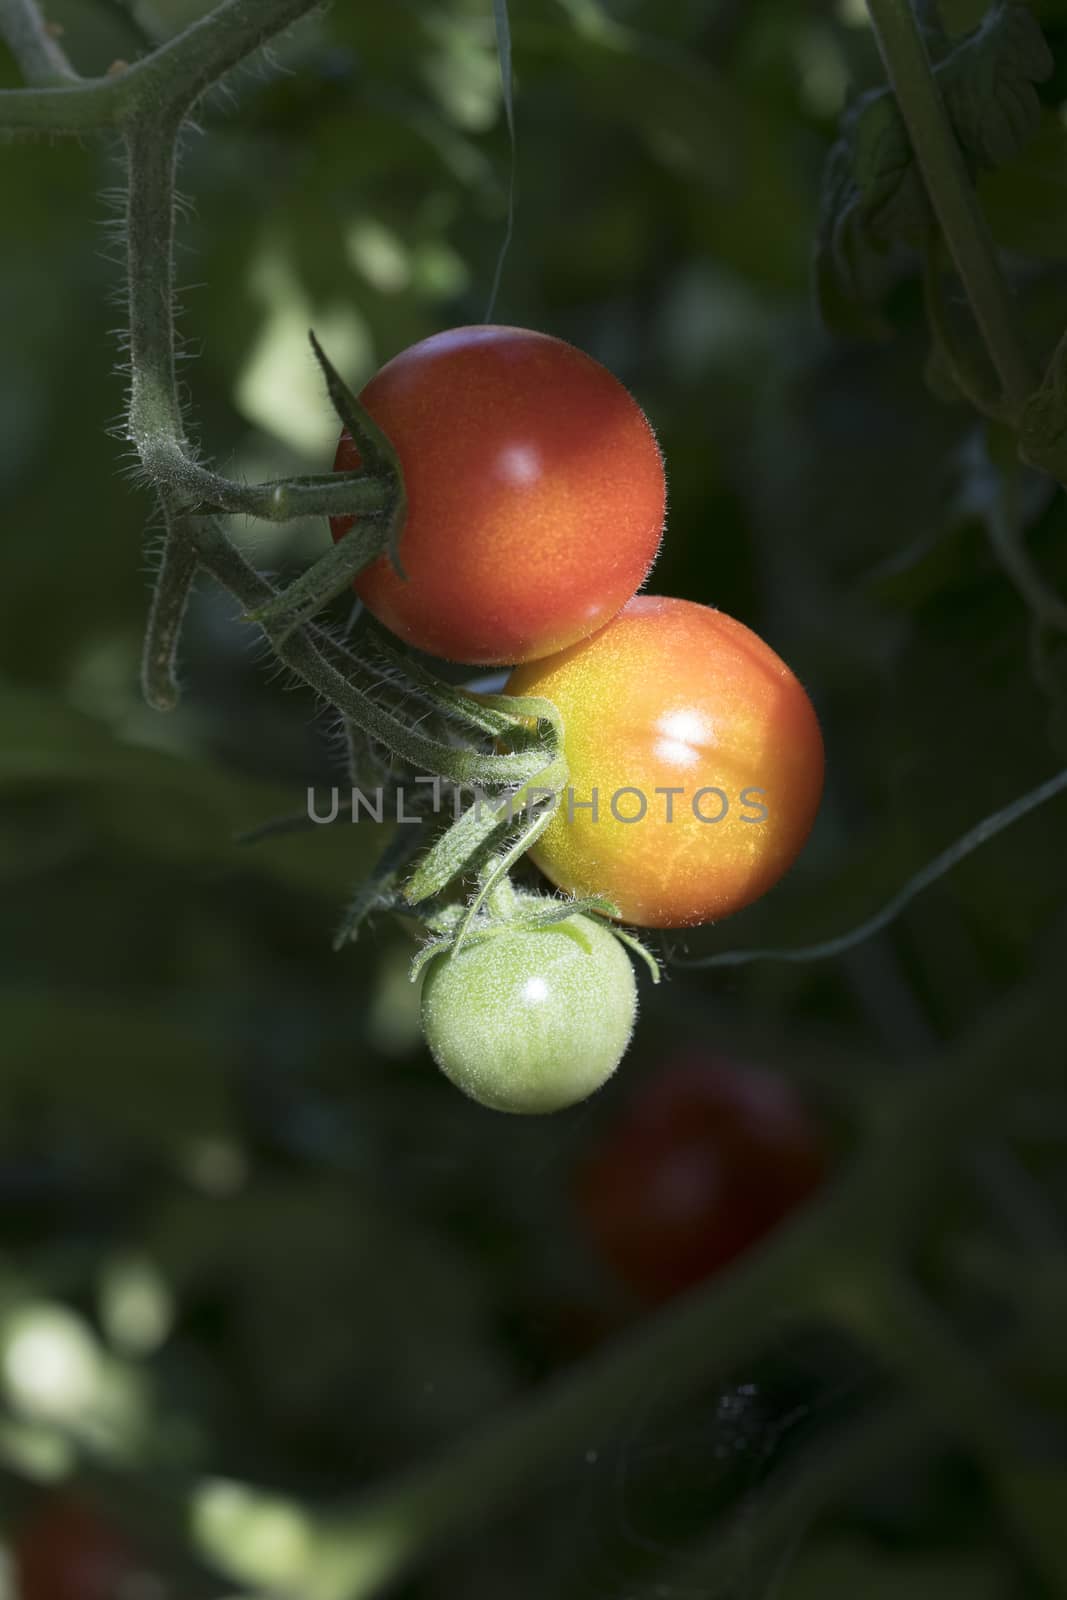 Tomatoes ripening in garden by asafaric